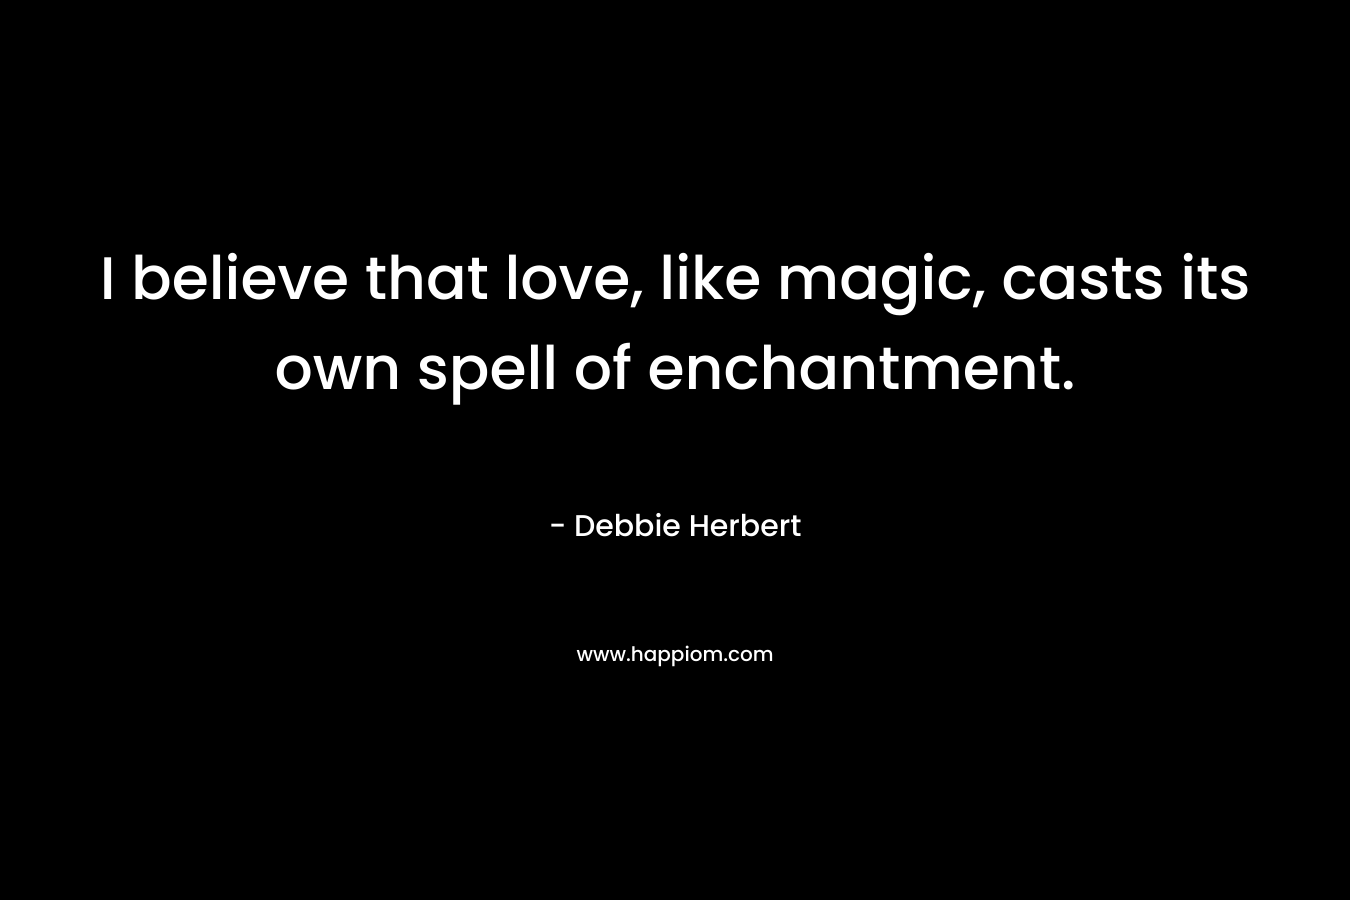 I believe that love, like magic, casts its own spell of enchantment.